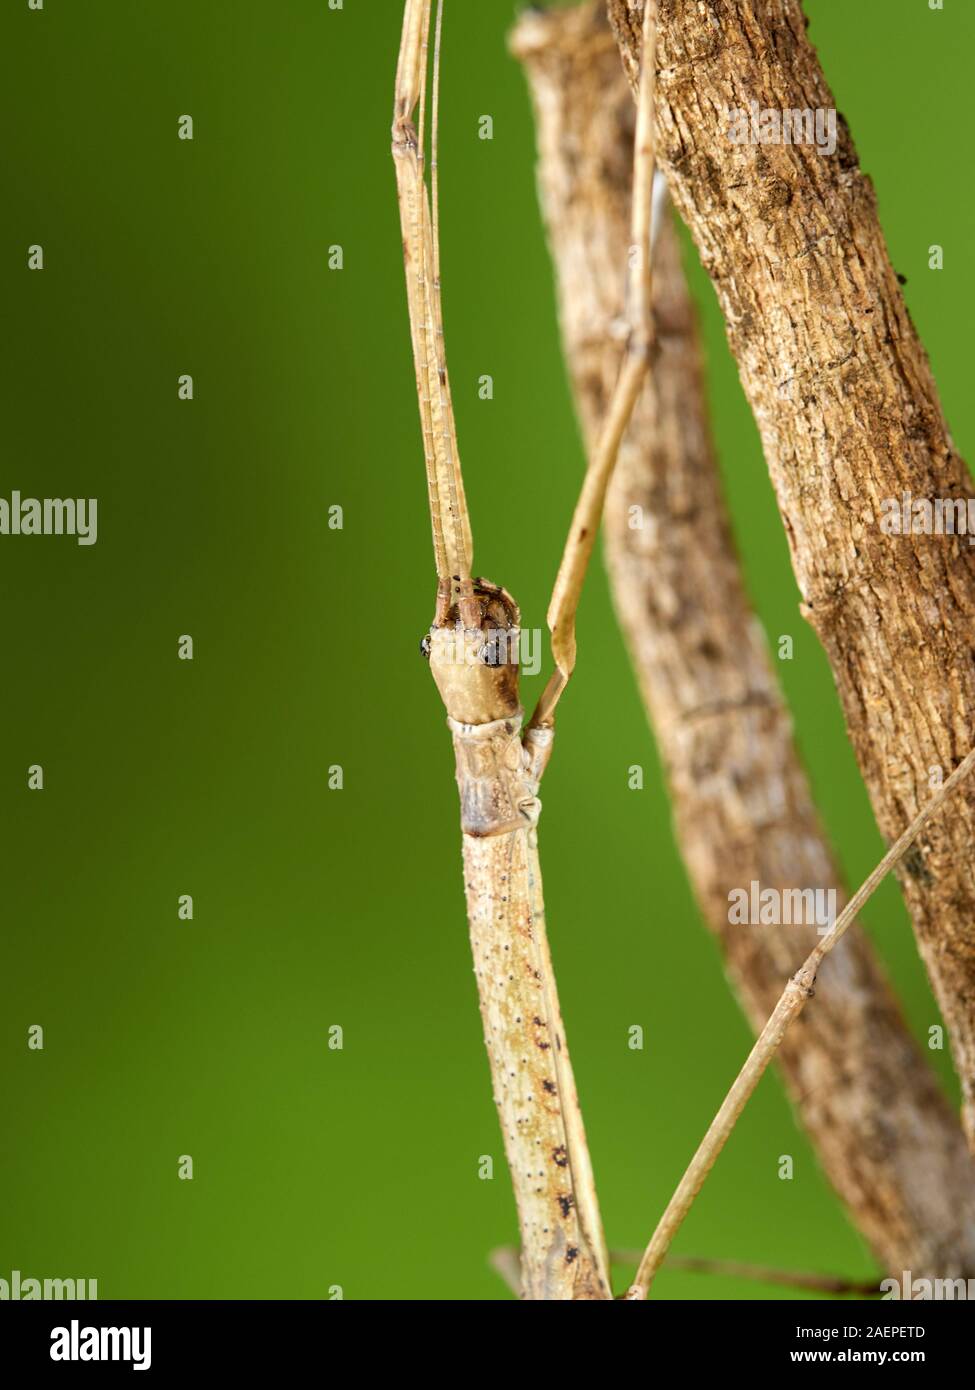 A macro shot of a stick insect (Carausius morosus) photographed against a green background in a studio set. Stock Photo